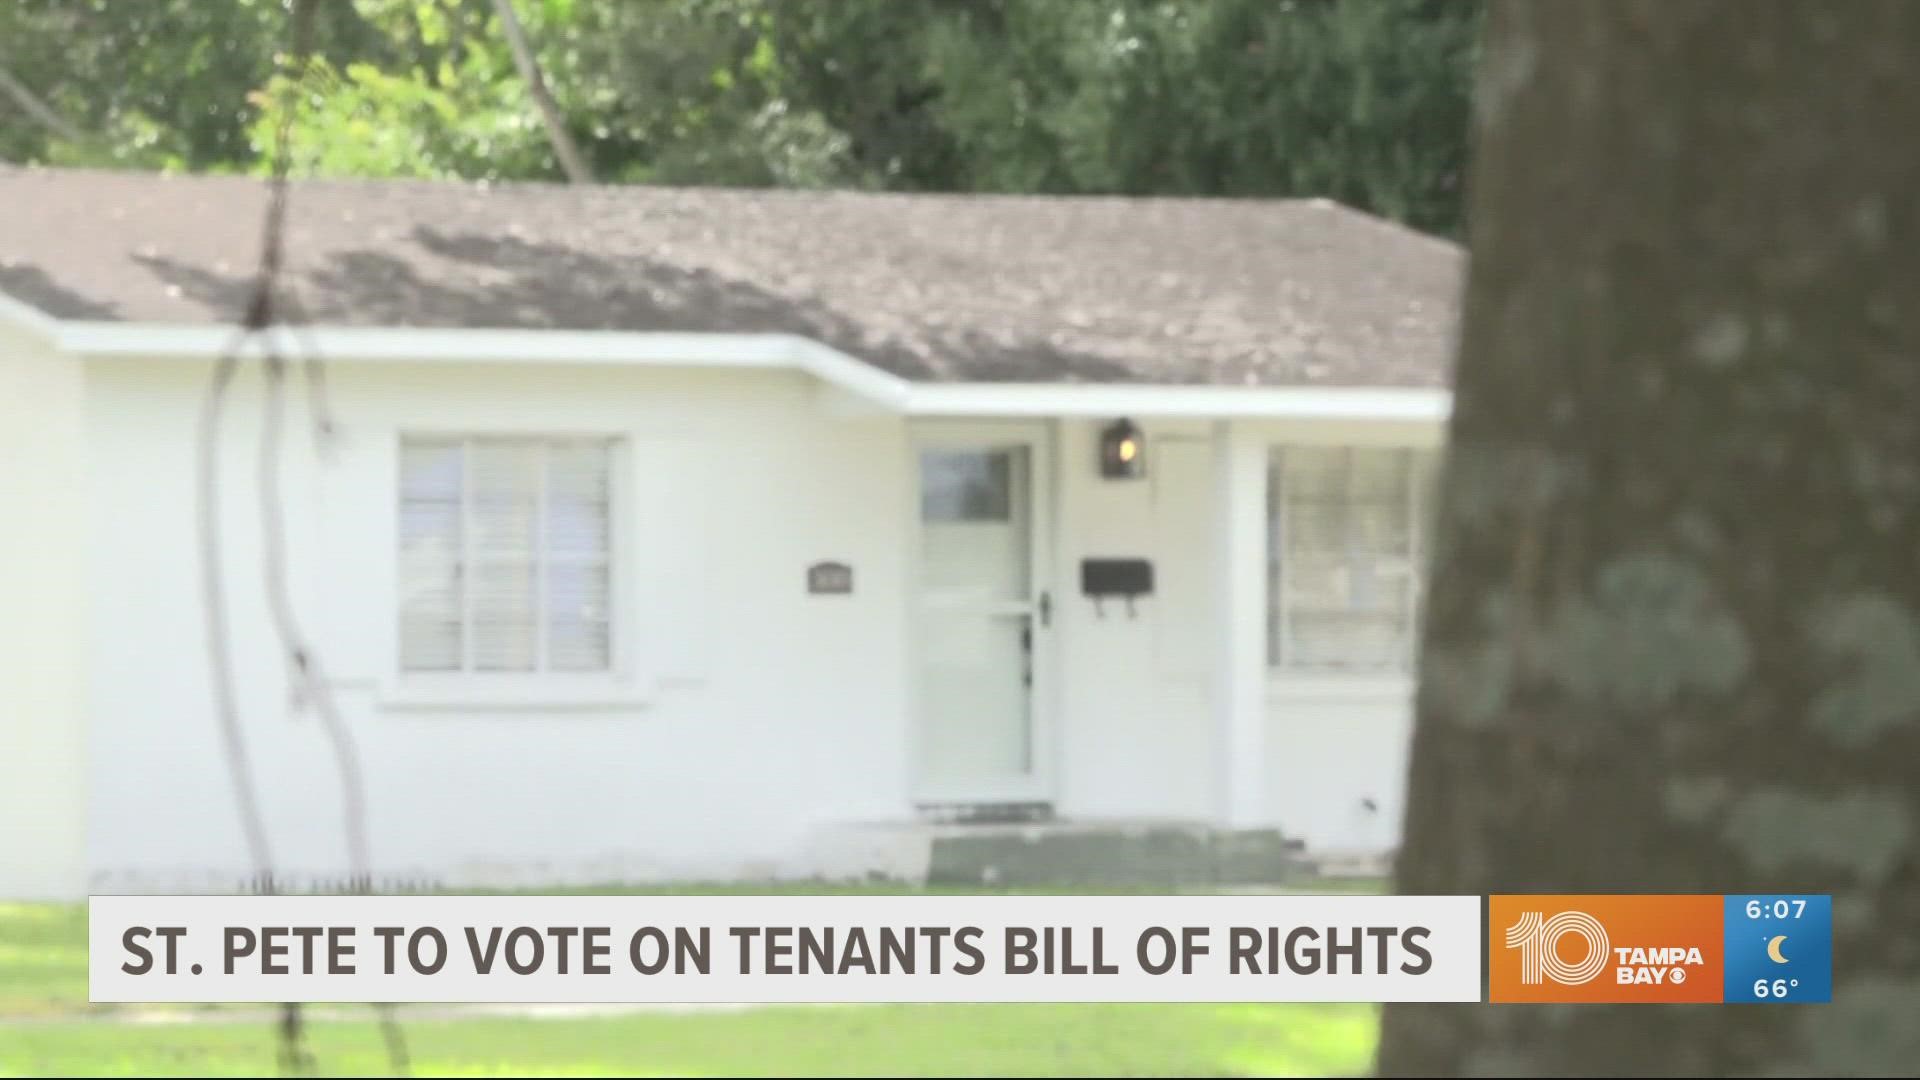 The city plans to adopt its own bill of rights for renters.